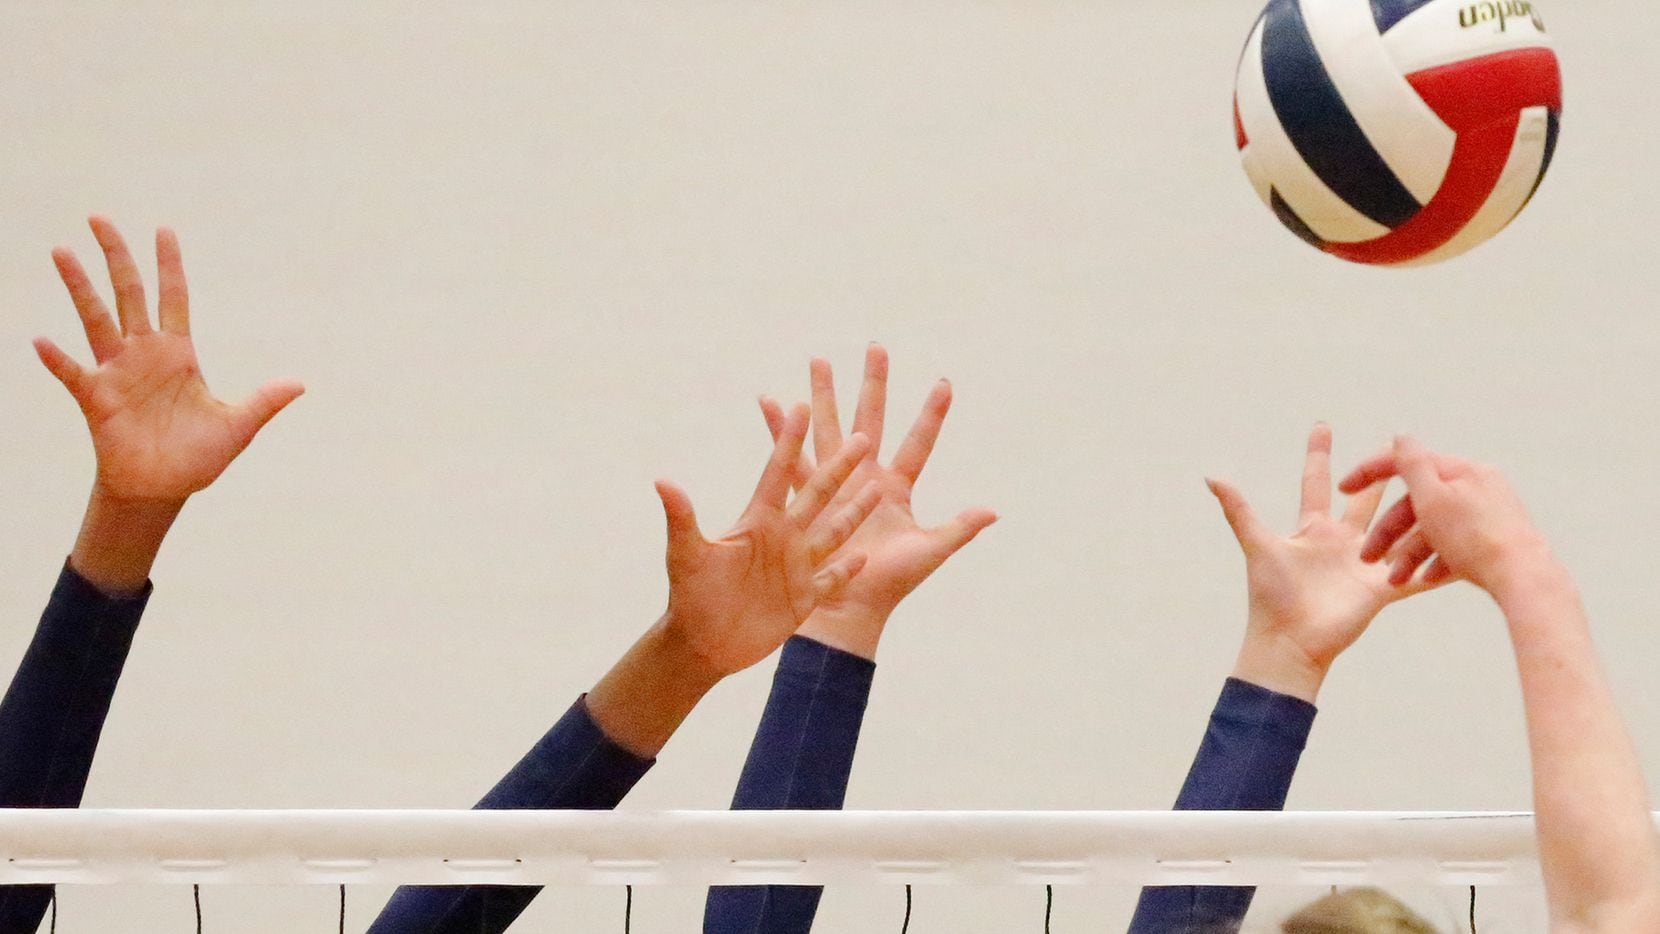 We recap today's volleyball action.